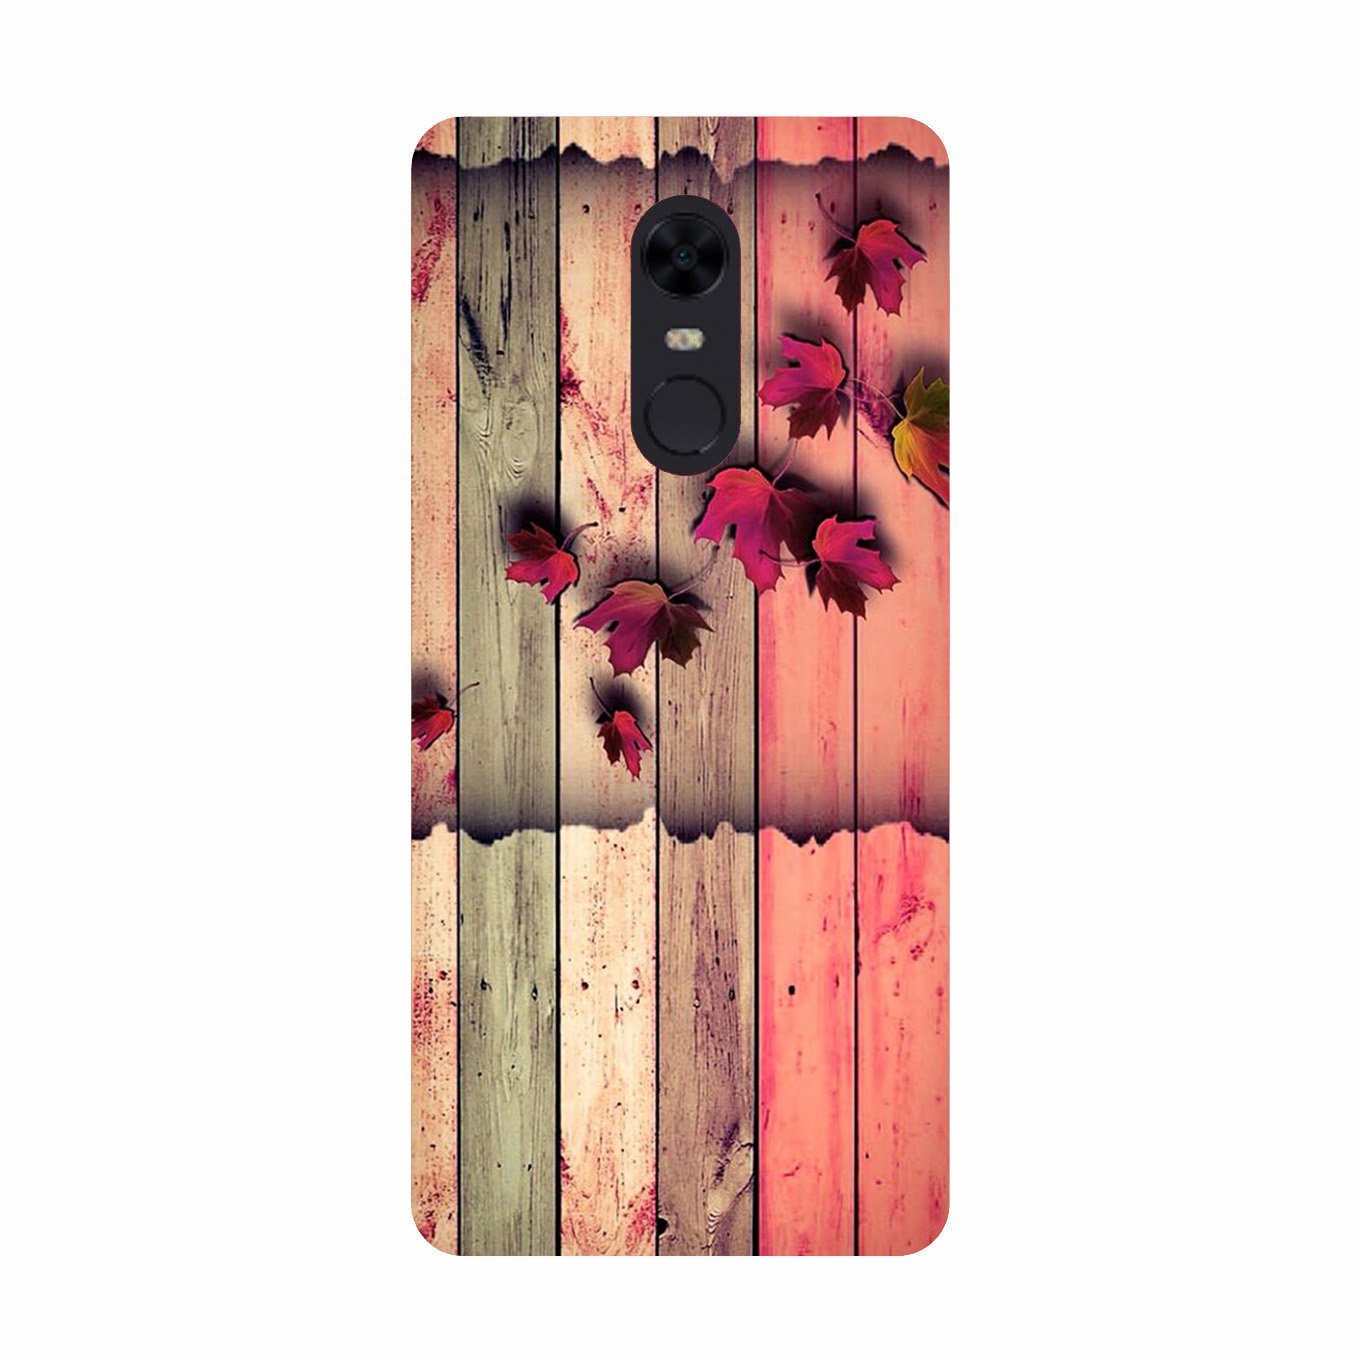 Wooden look2 Case for Redmi 5